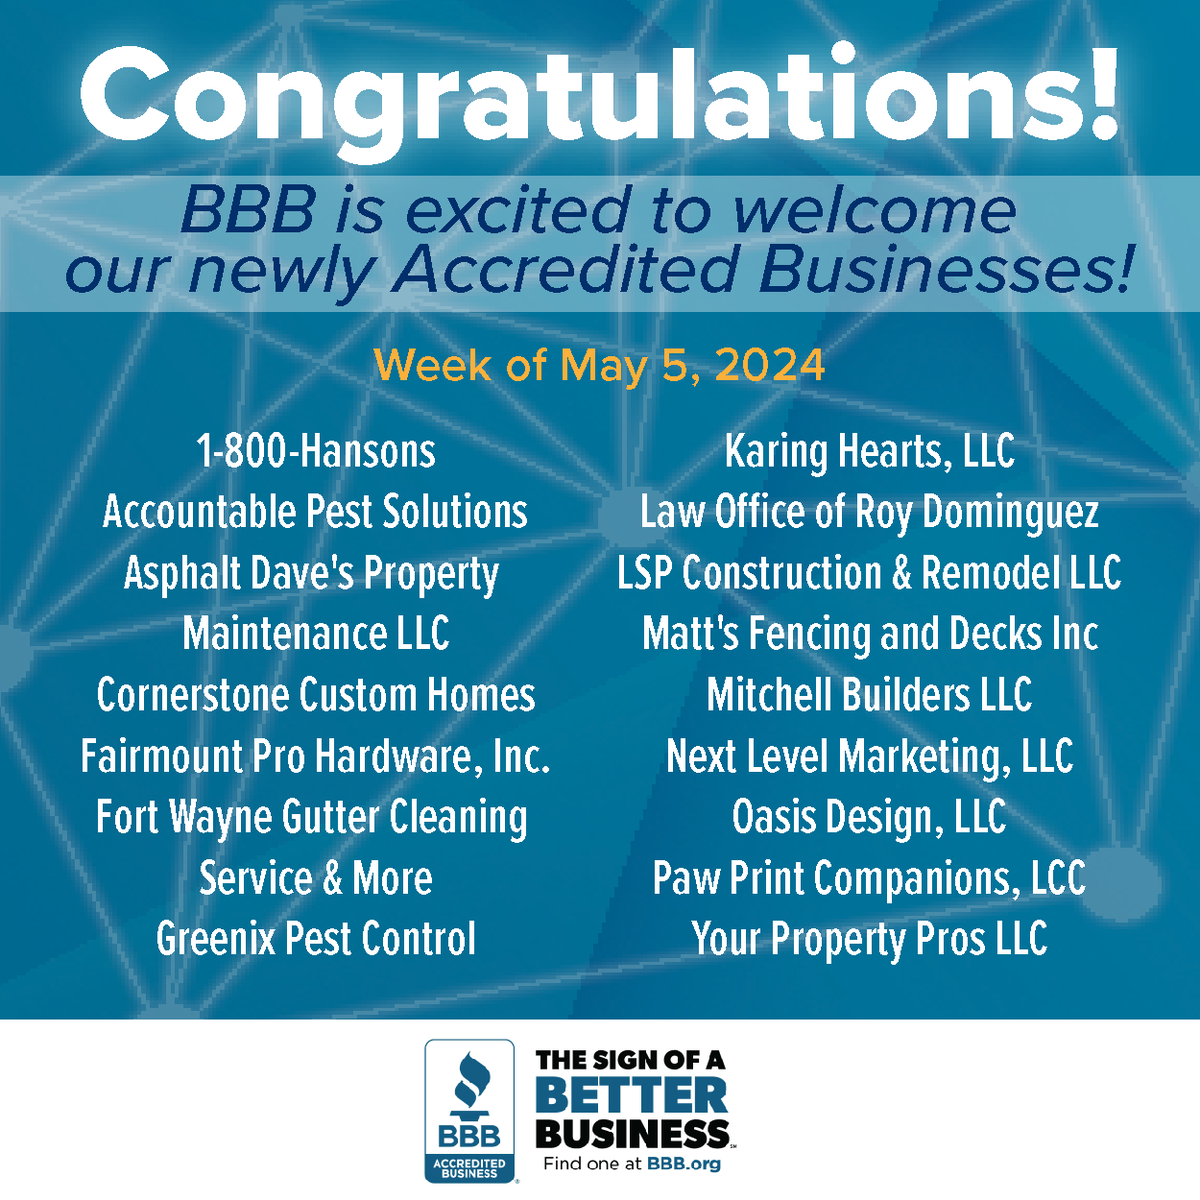 Welcome and congratulations to our newly Accredited Businesses!
#BBBAccreditedBusiness #BBB #WelcomeWednesday #SignofaBetterBusiness #Lookforit #TrustworthyBusiness